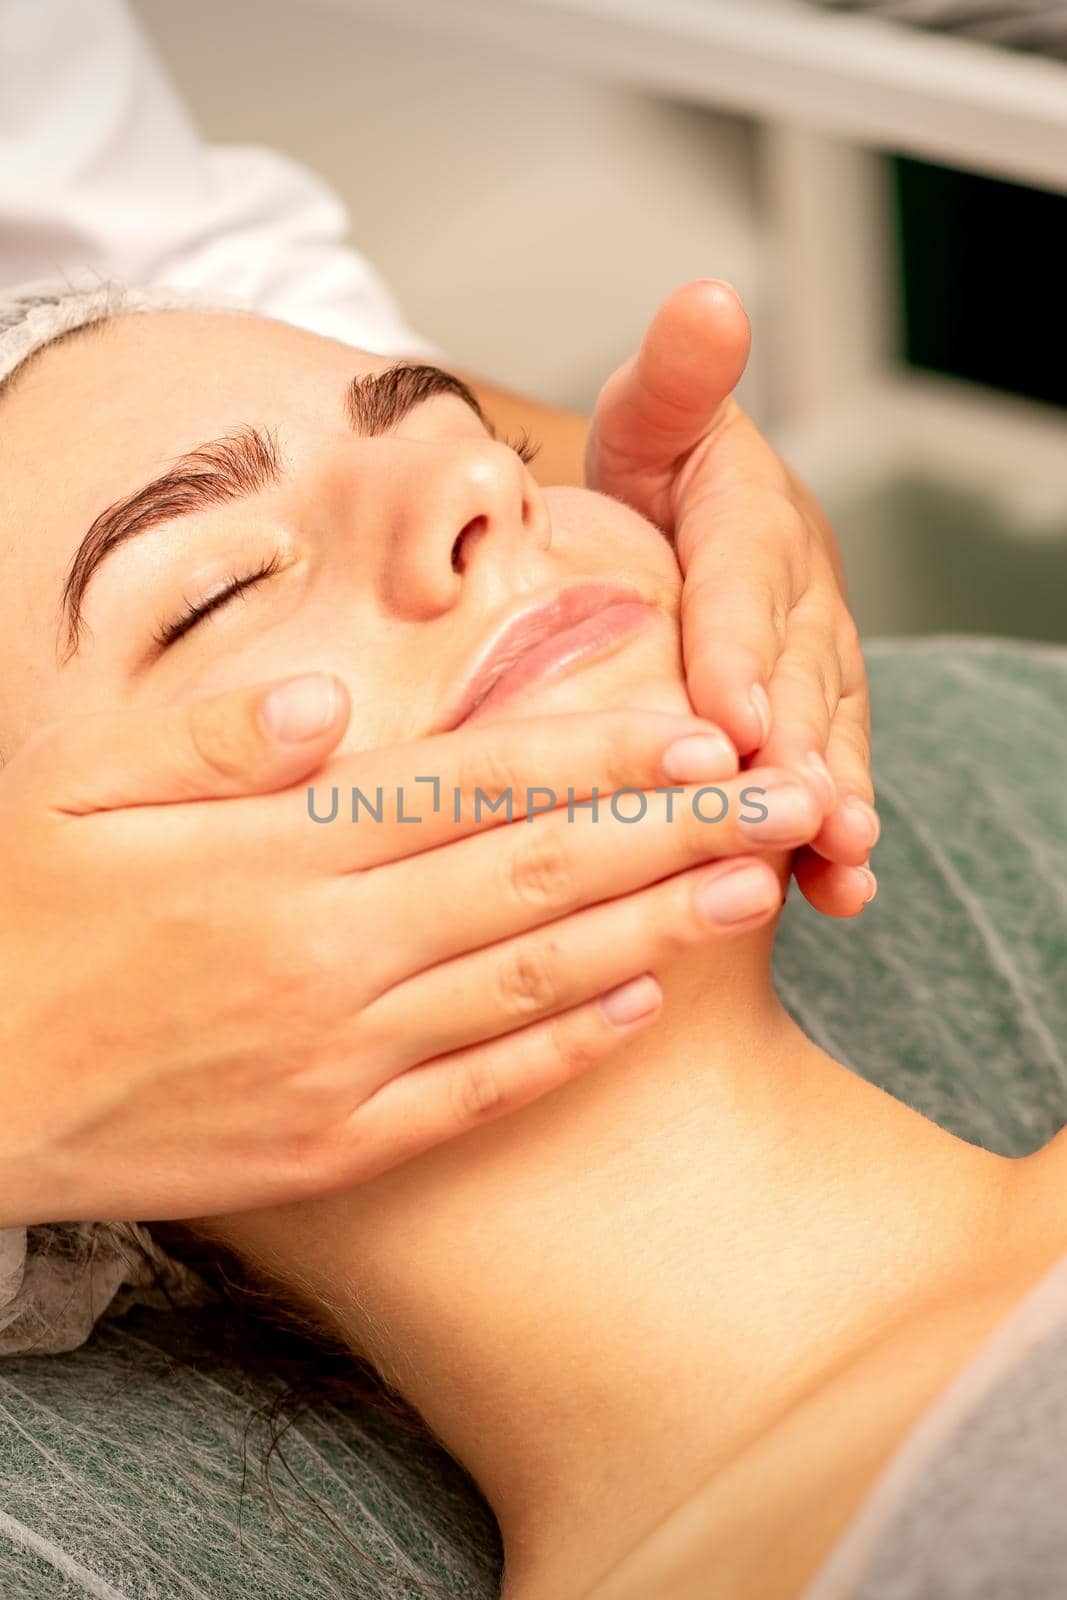 Beautiful caucasian young woman receiving a facial massage with closed eyes in spa salon, close up. Relaxing treatment concept